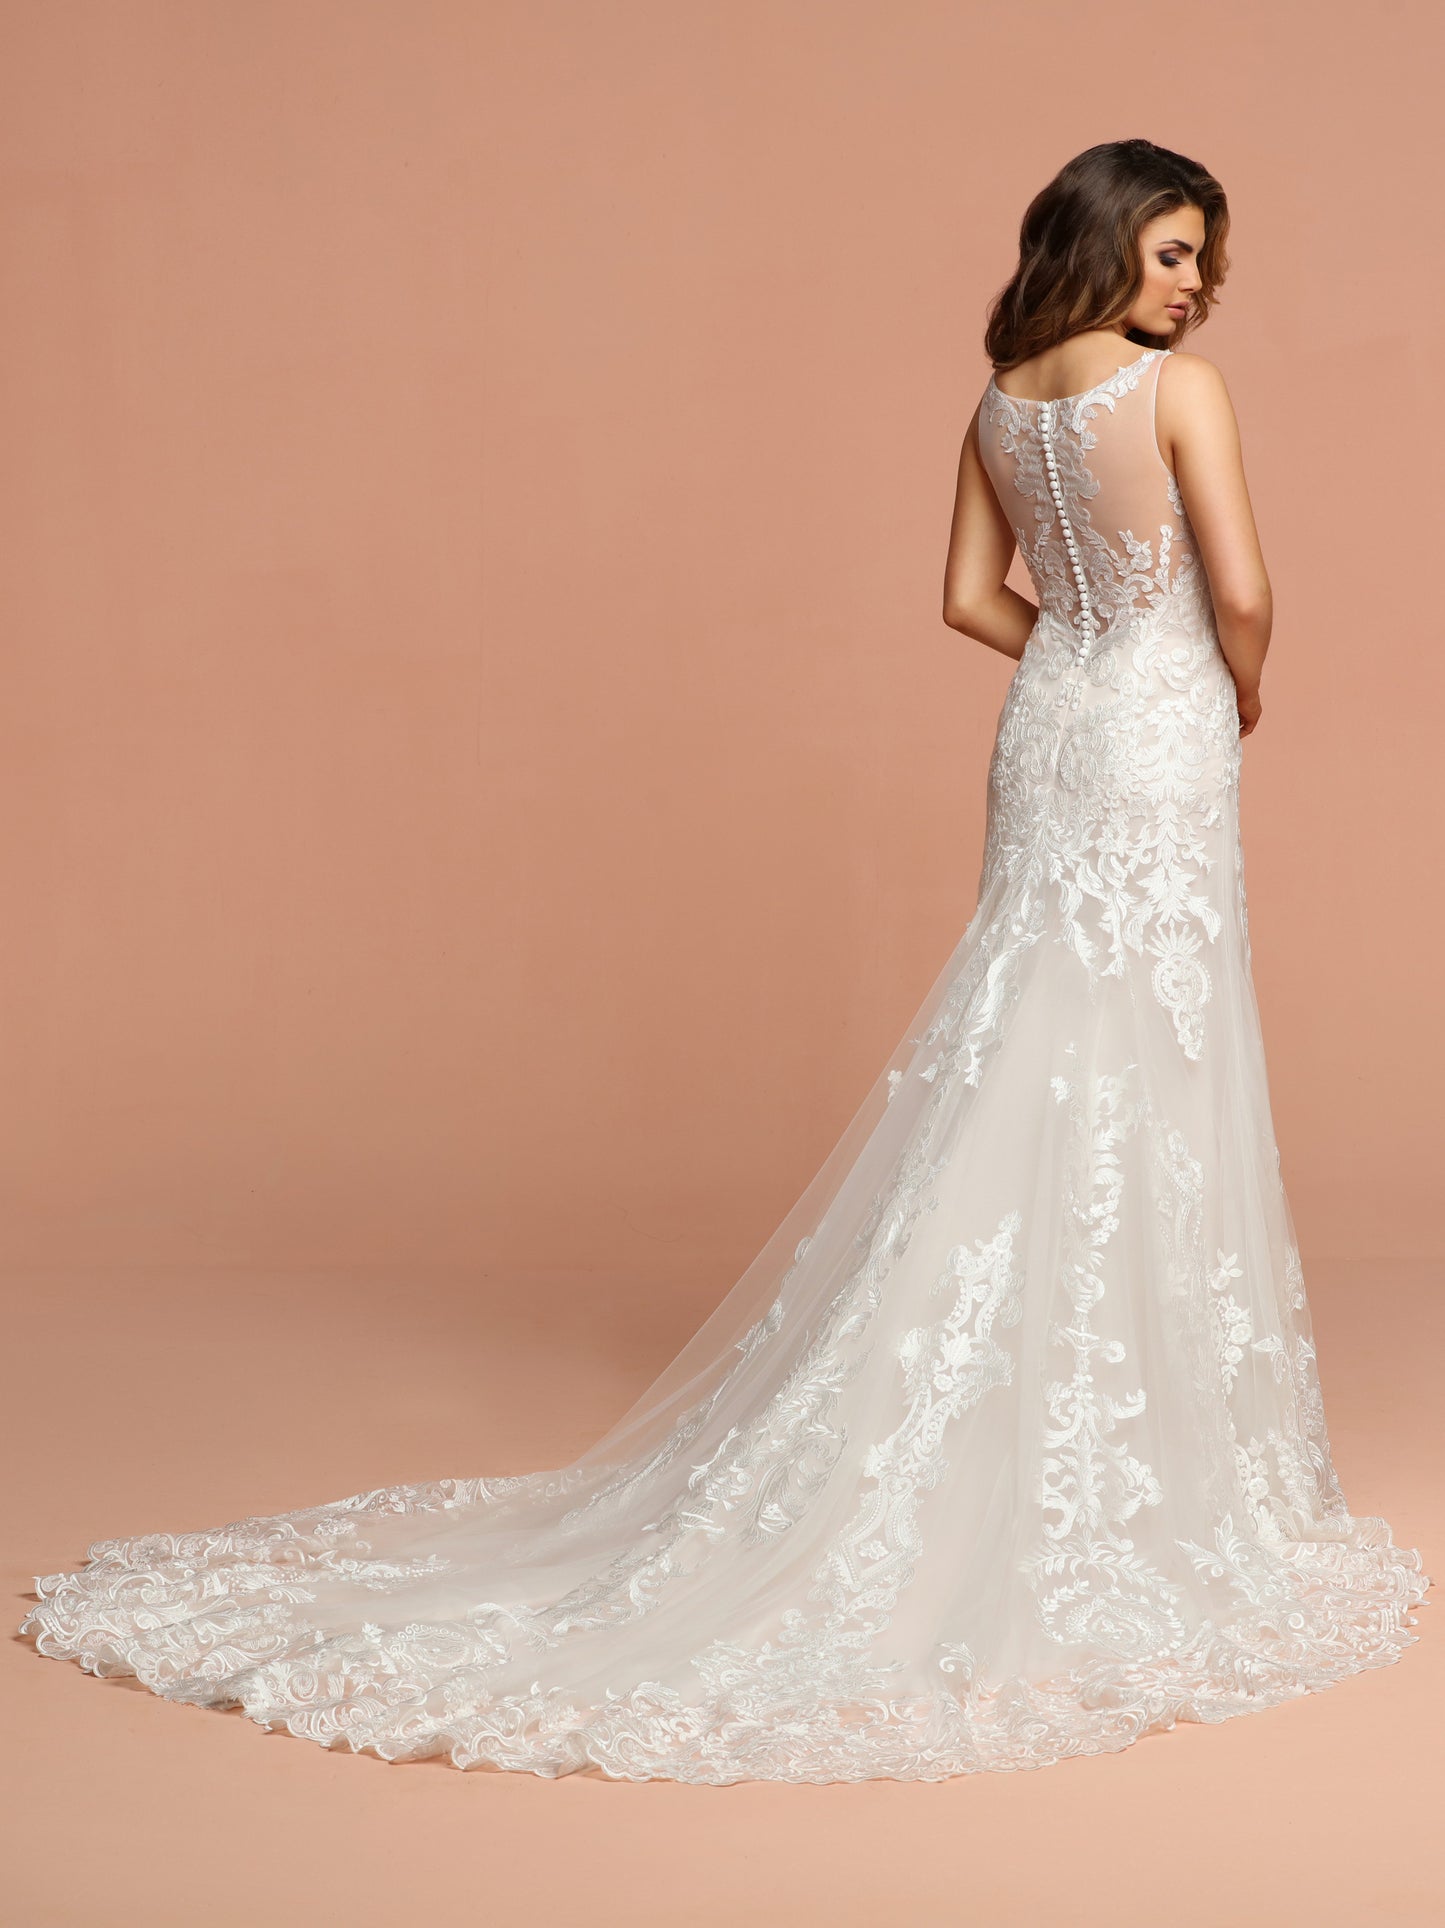 Davinci Bridal 50578 is a stunning Lace Mermaid Silhouette Fit & Flare Wedding Dress. Fitted Bodice with lace overlay on tulle. Plunging V Neckline with lace straps leading to a sheer illusion tulle back with lace tattoo effect. Elaborate lace edge on the lush skirt. Button Back seam.  Available for 1-2 Week Delivery!!!  Available Sizes: 2,4,6,8,10,12,14,16,18,20  Available Colors: Ivory/Blush, Ivory/Ivory